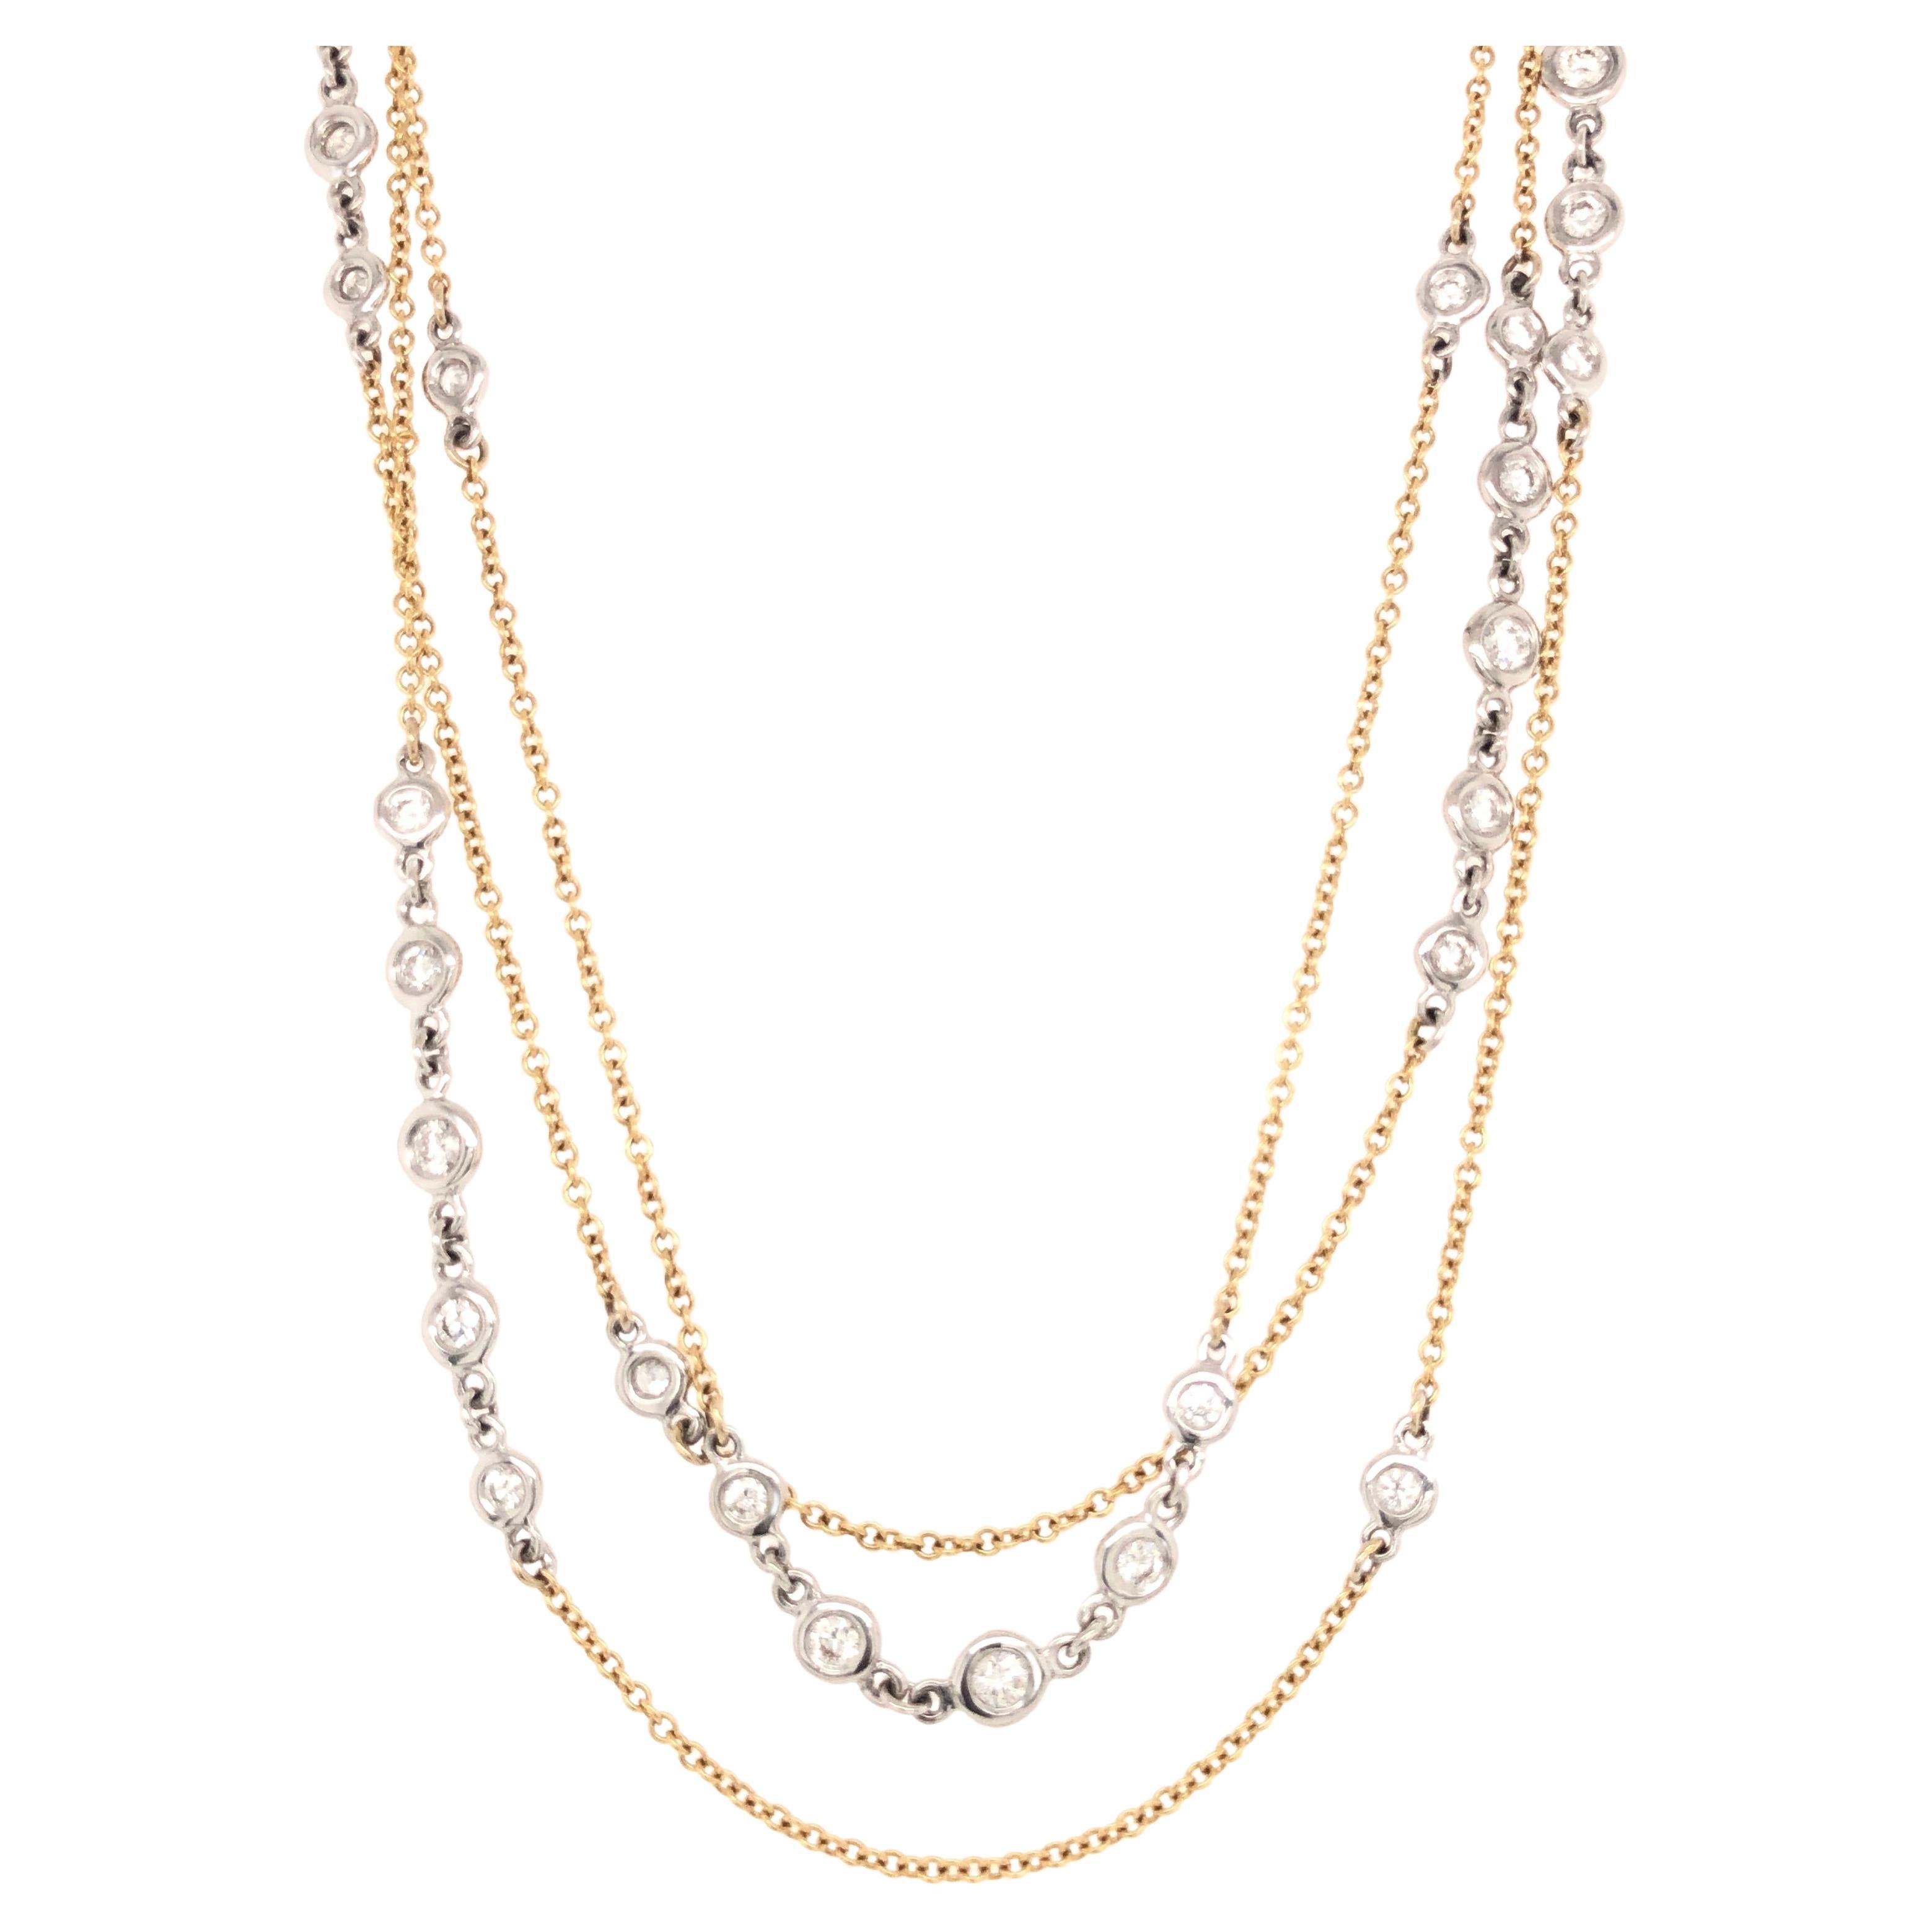 A Link Bezel Diamonds by the Yard Necklace 36" in Length 18K White & Yellow Gold For Sale